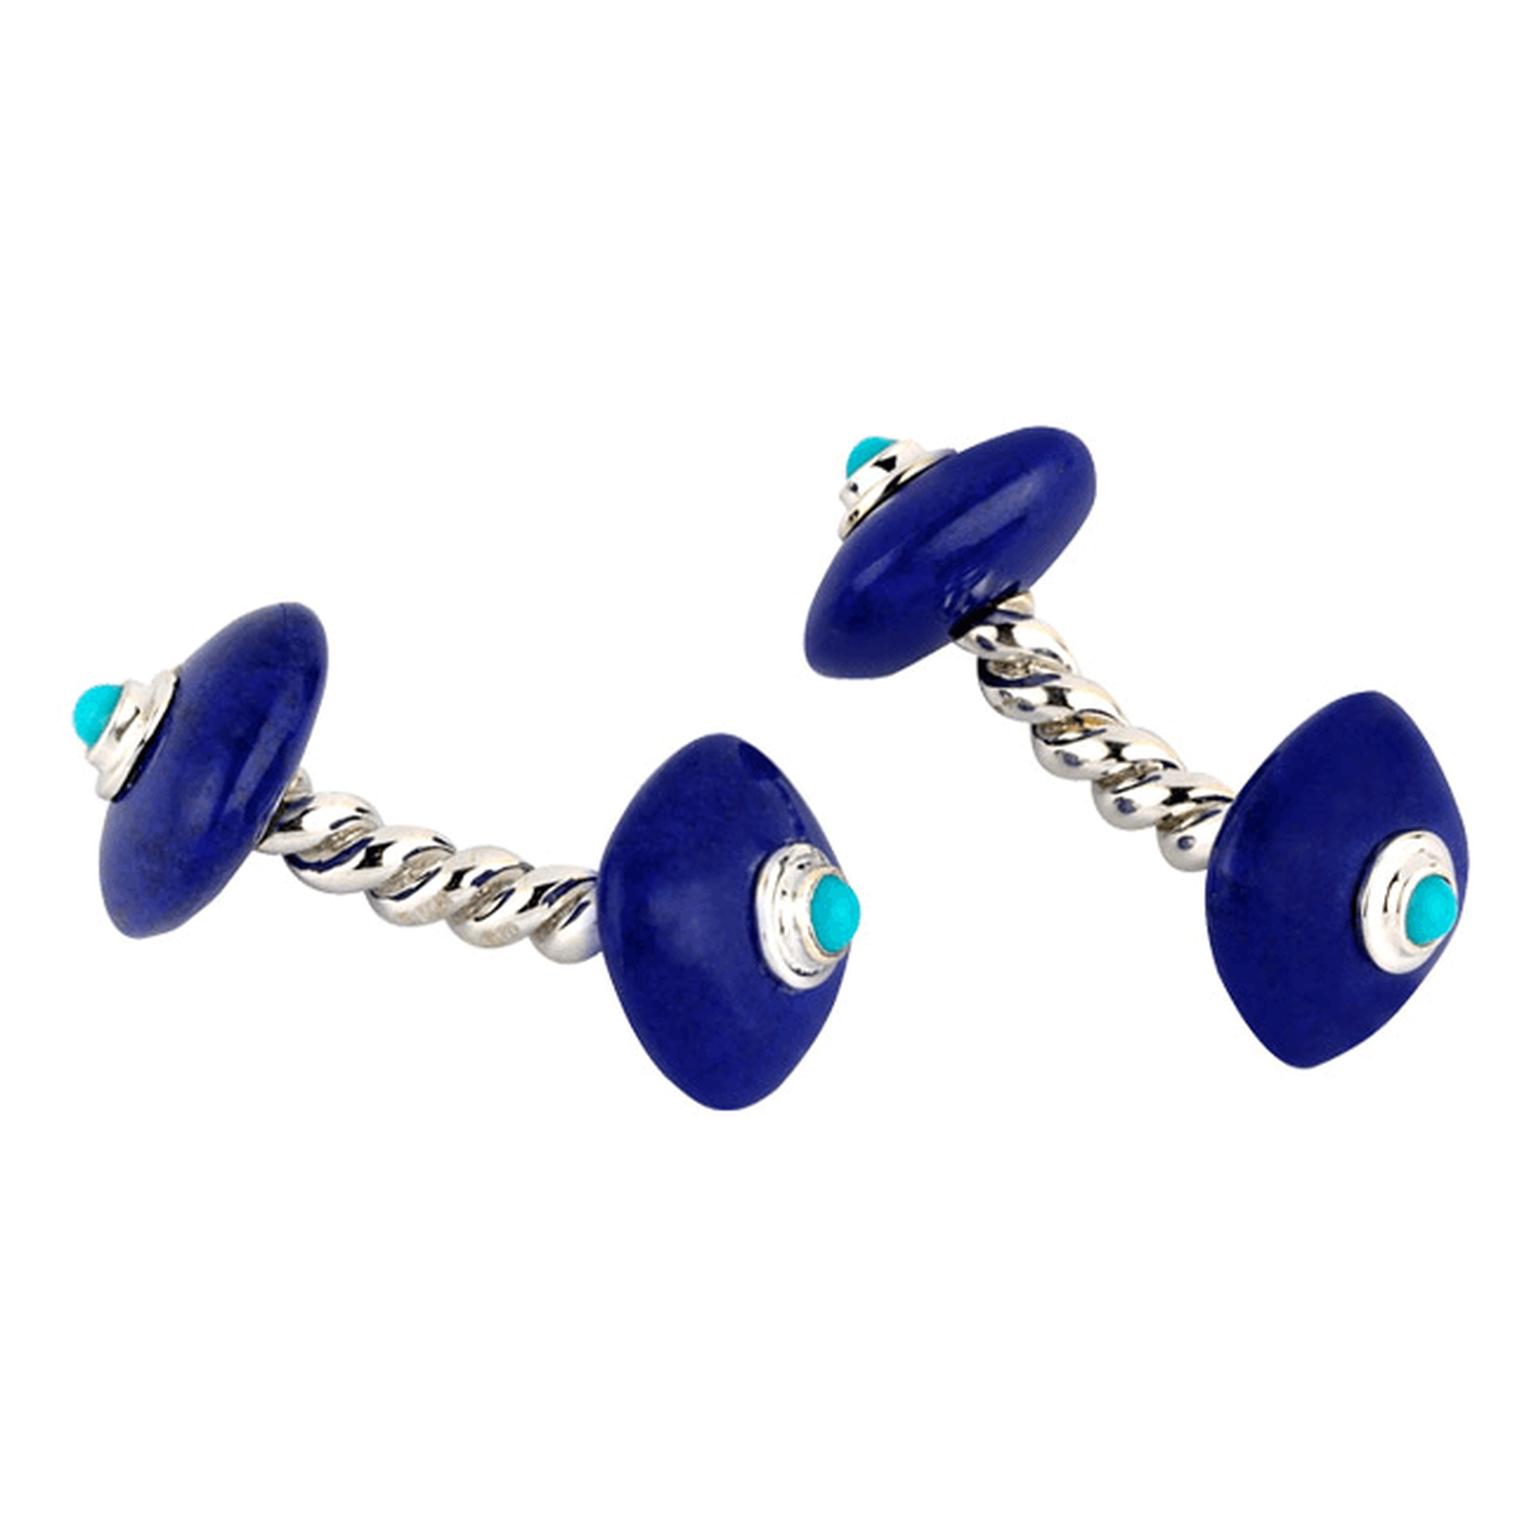 Deakin & Francis Twisted Bar cufflinks with lapis lasuli and turquoise.